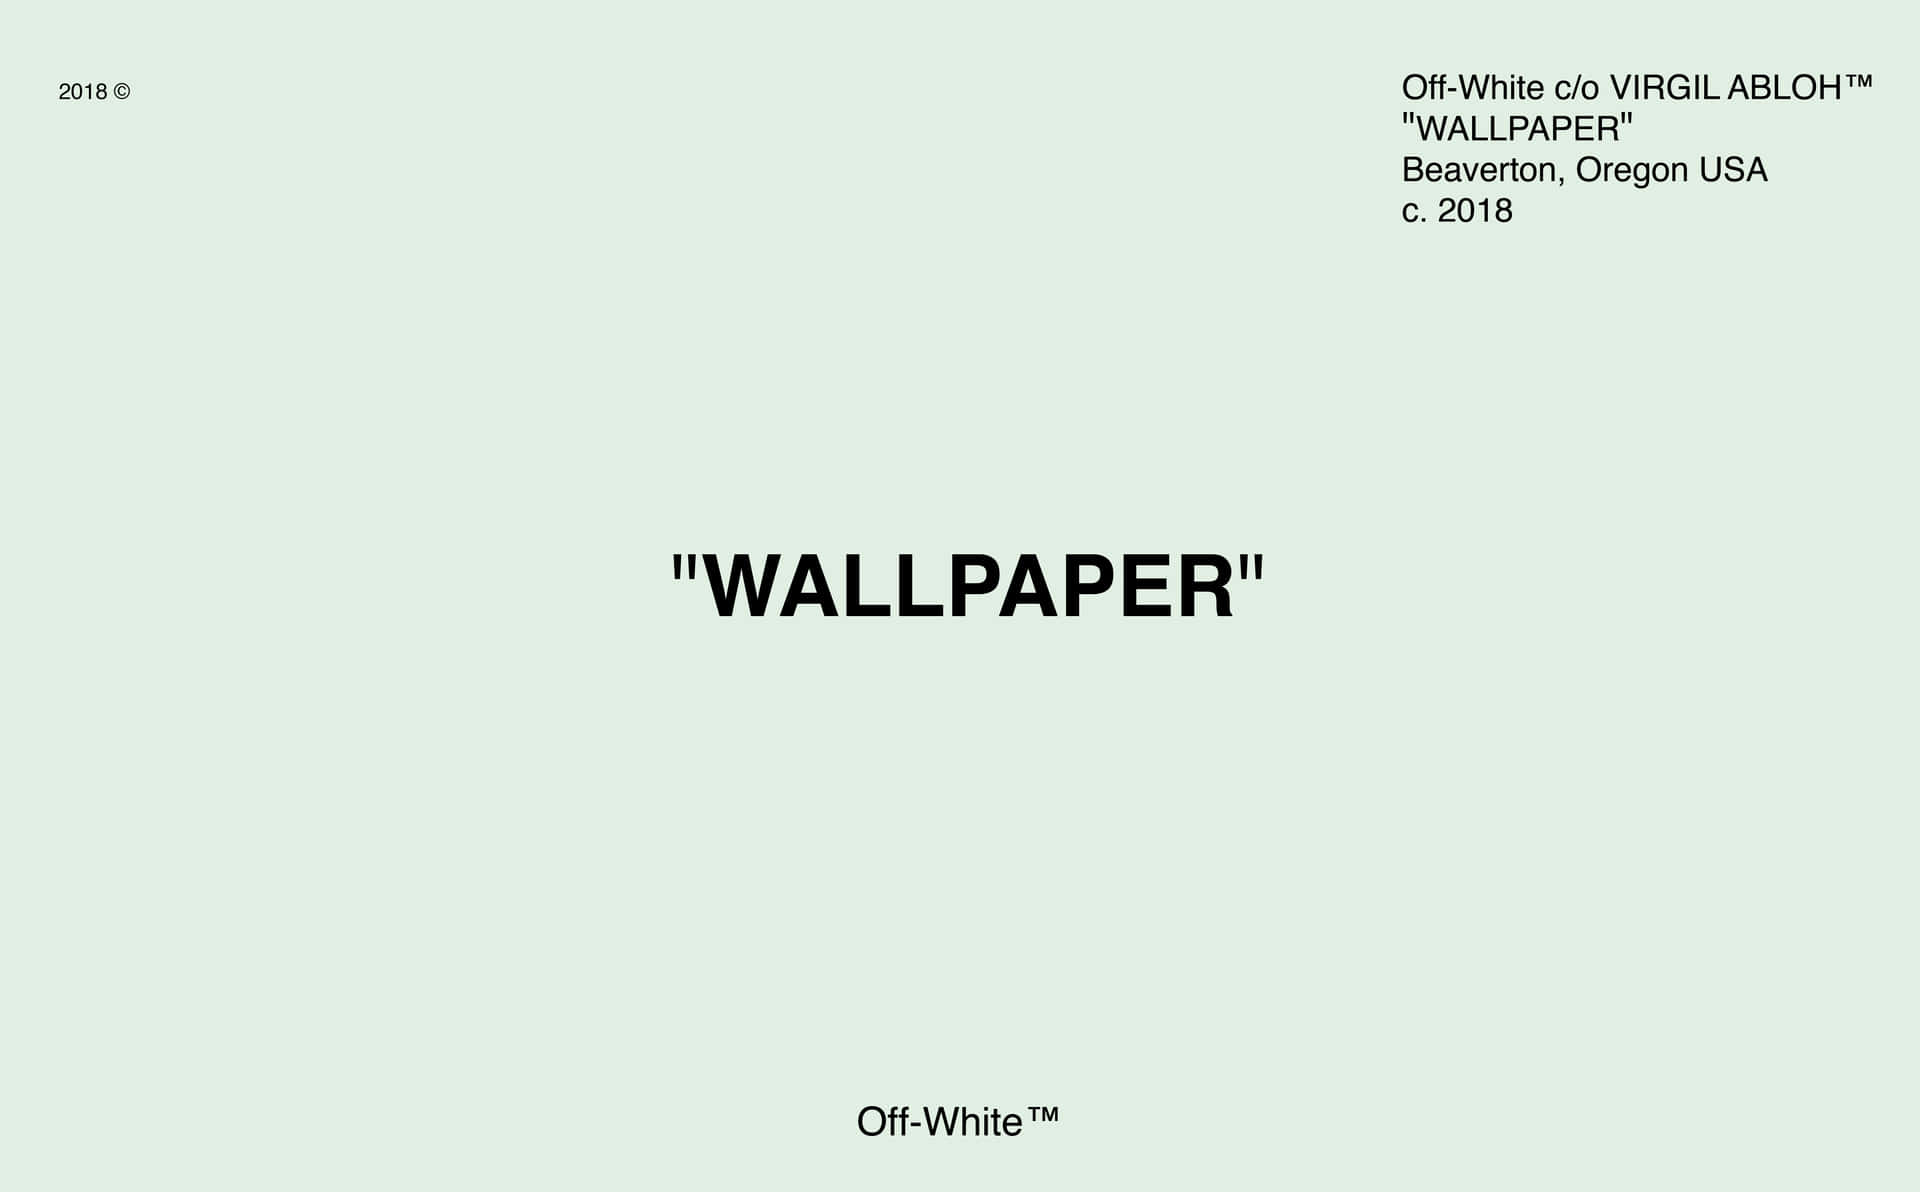 Off White Background